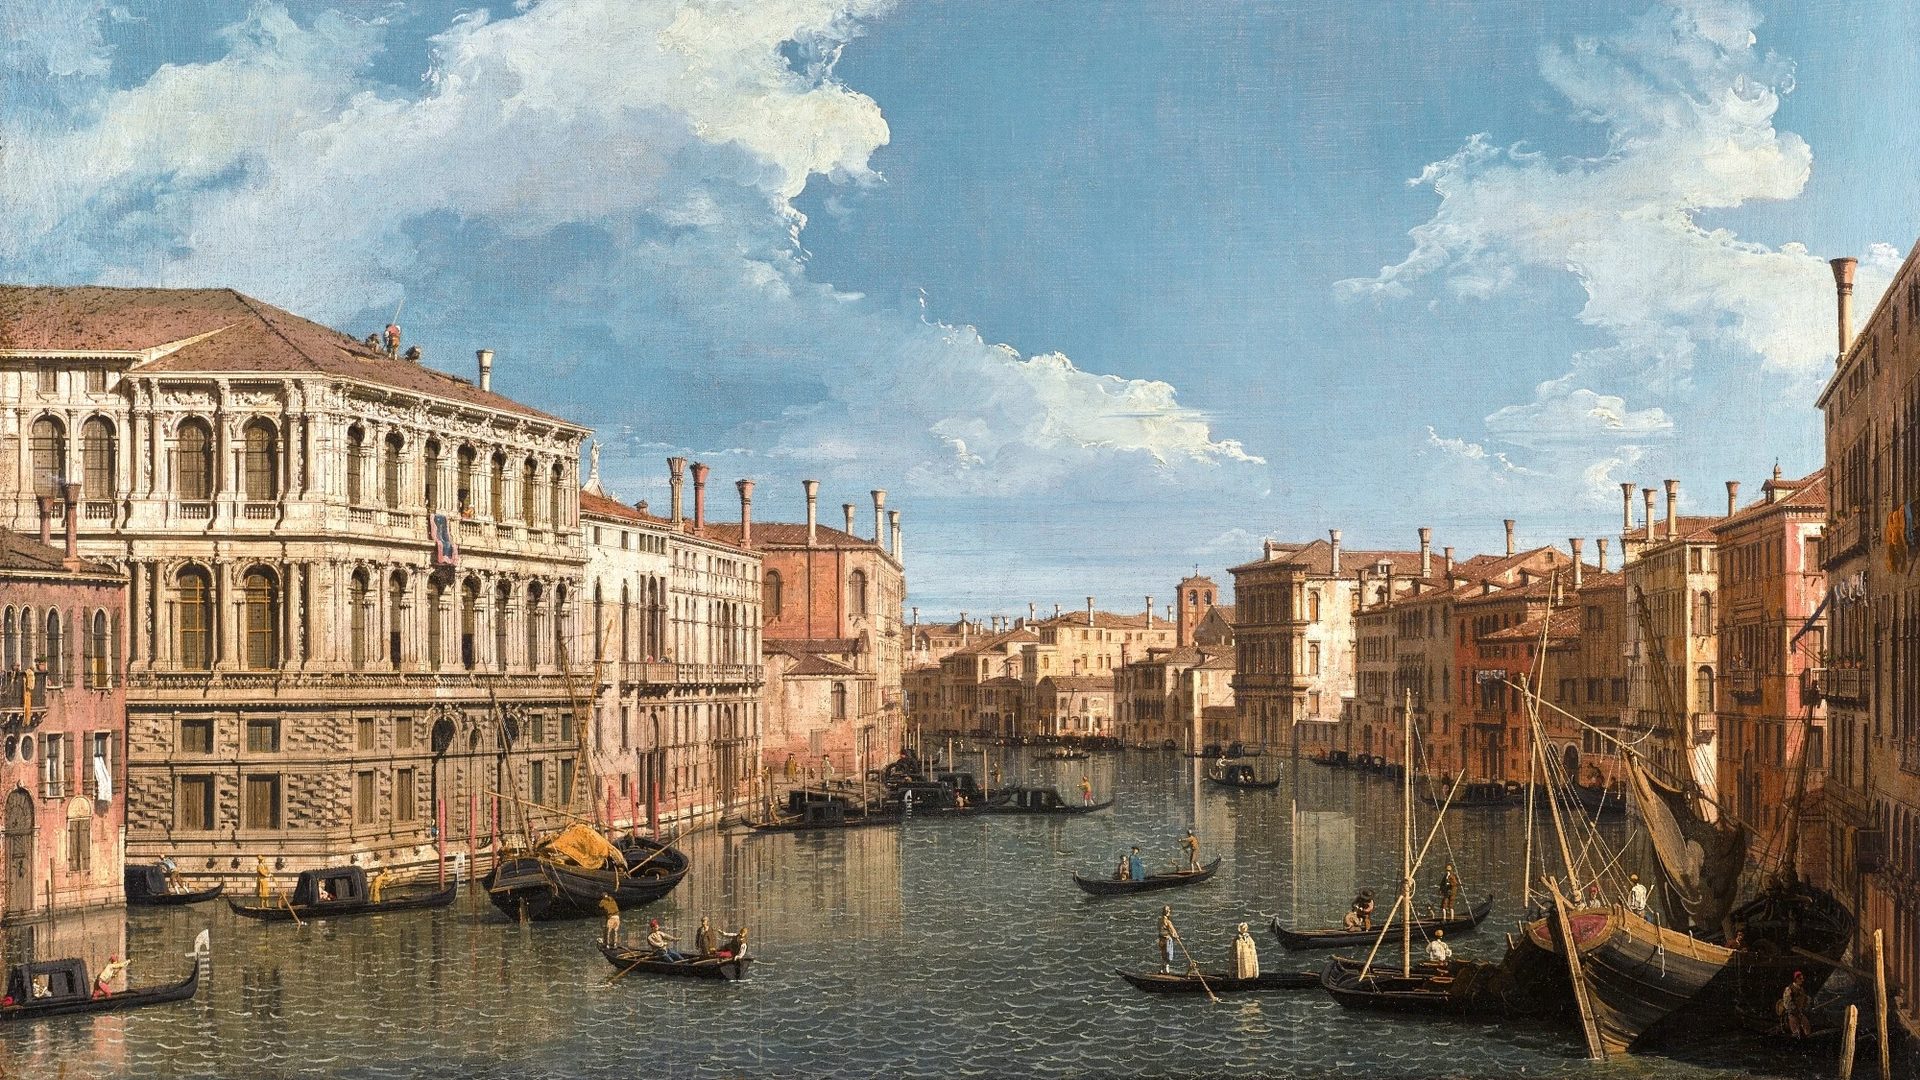 One of Canaletto’s 
many works depicting the Grand Canal in 
Venice during the 18th century